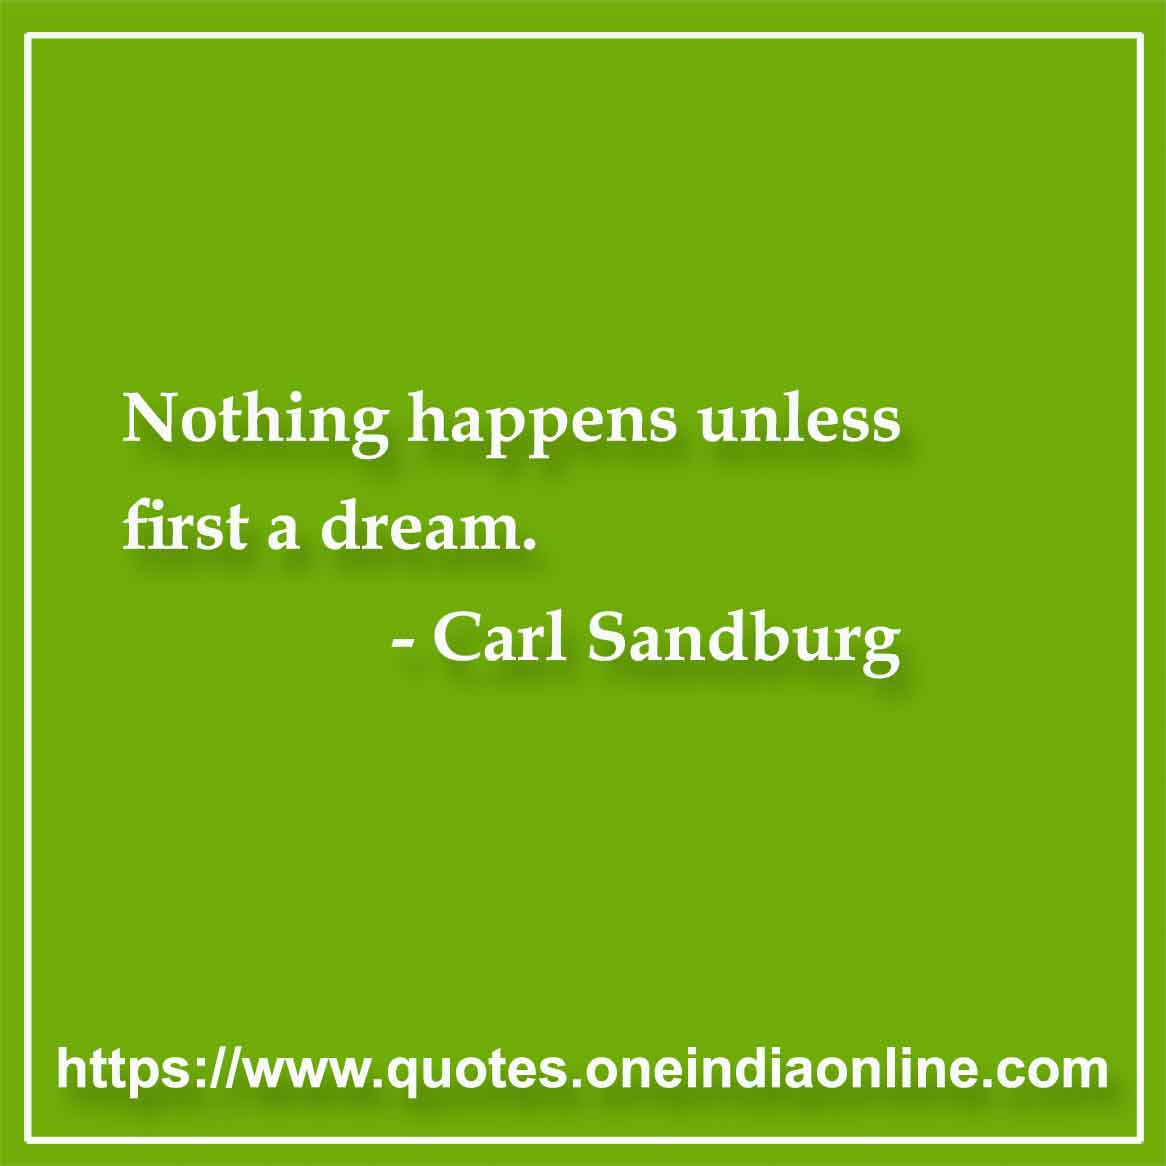 Nothing happens unless first a dream.

-by Carl Sandberg